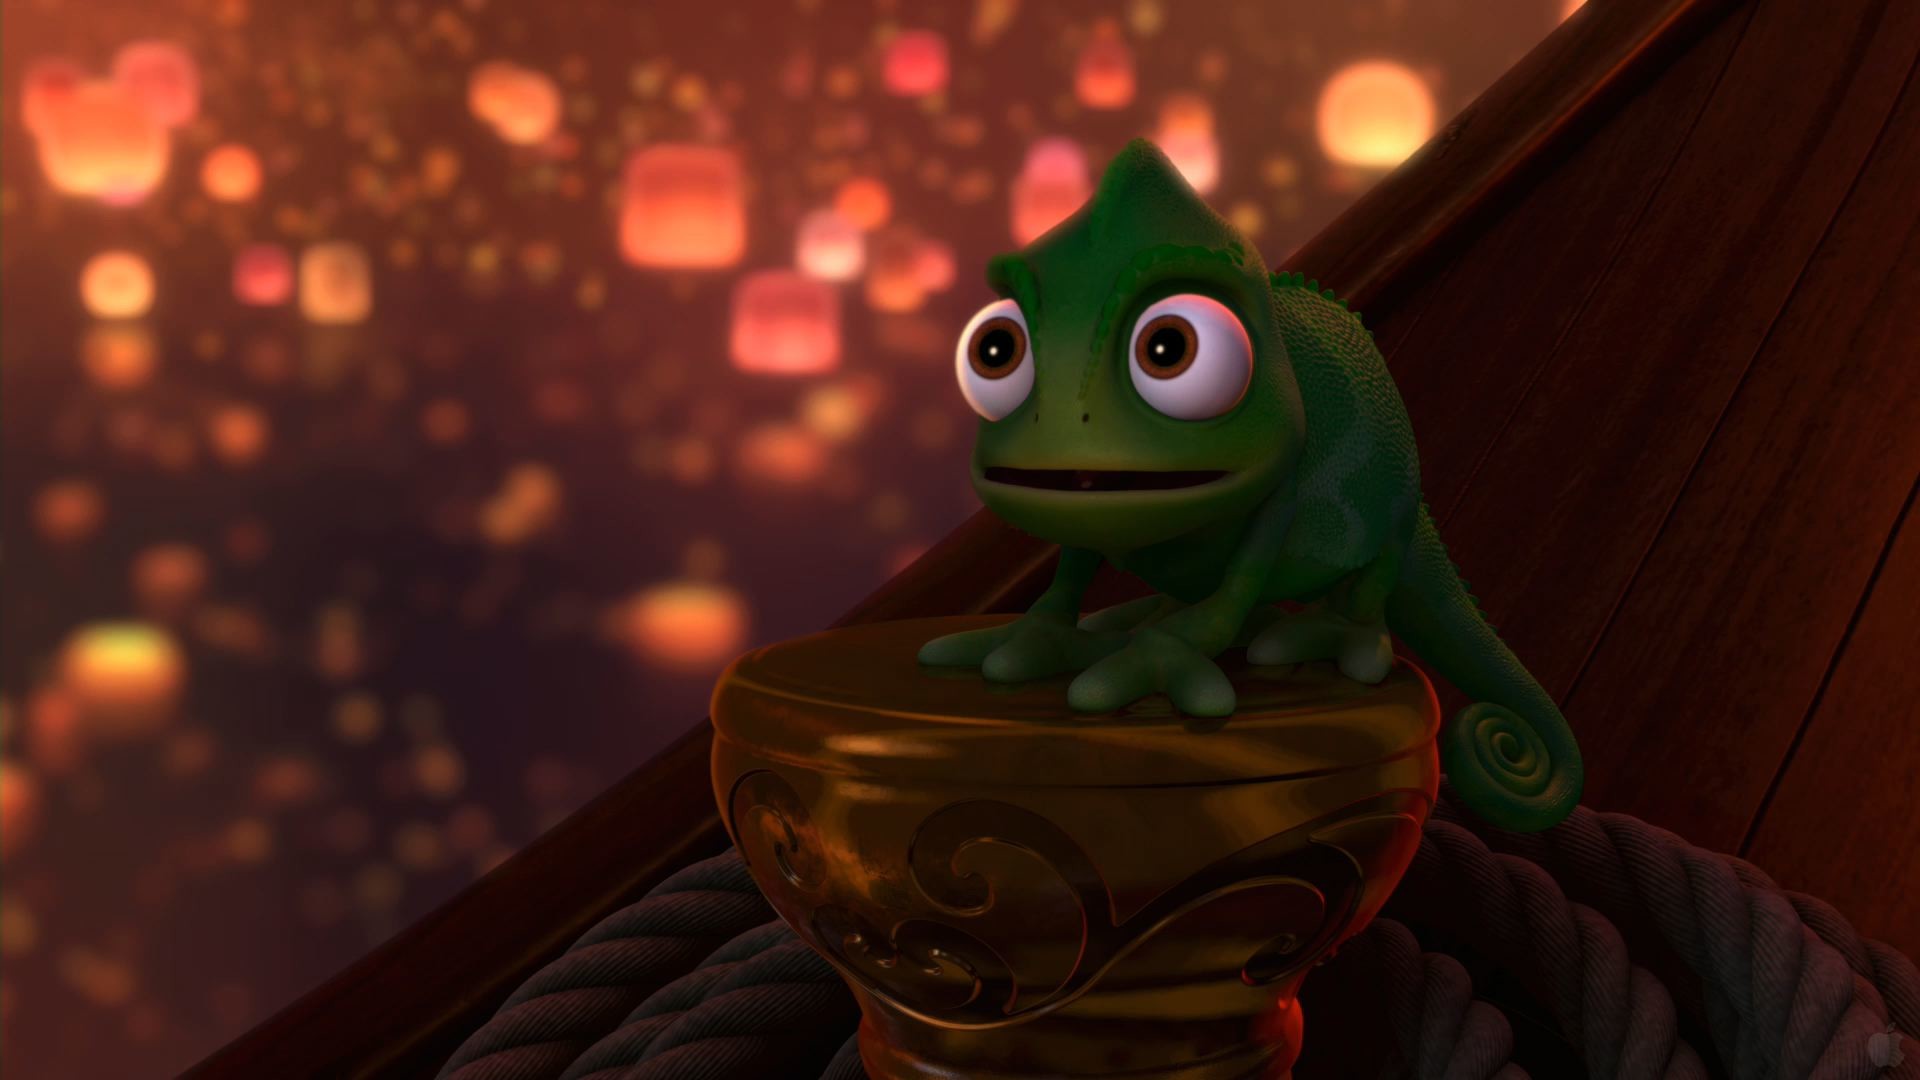 Pascal Tangled Pascal in Disneys Tangled wallpaper – Click picture for high